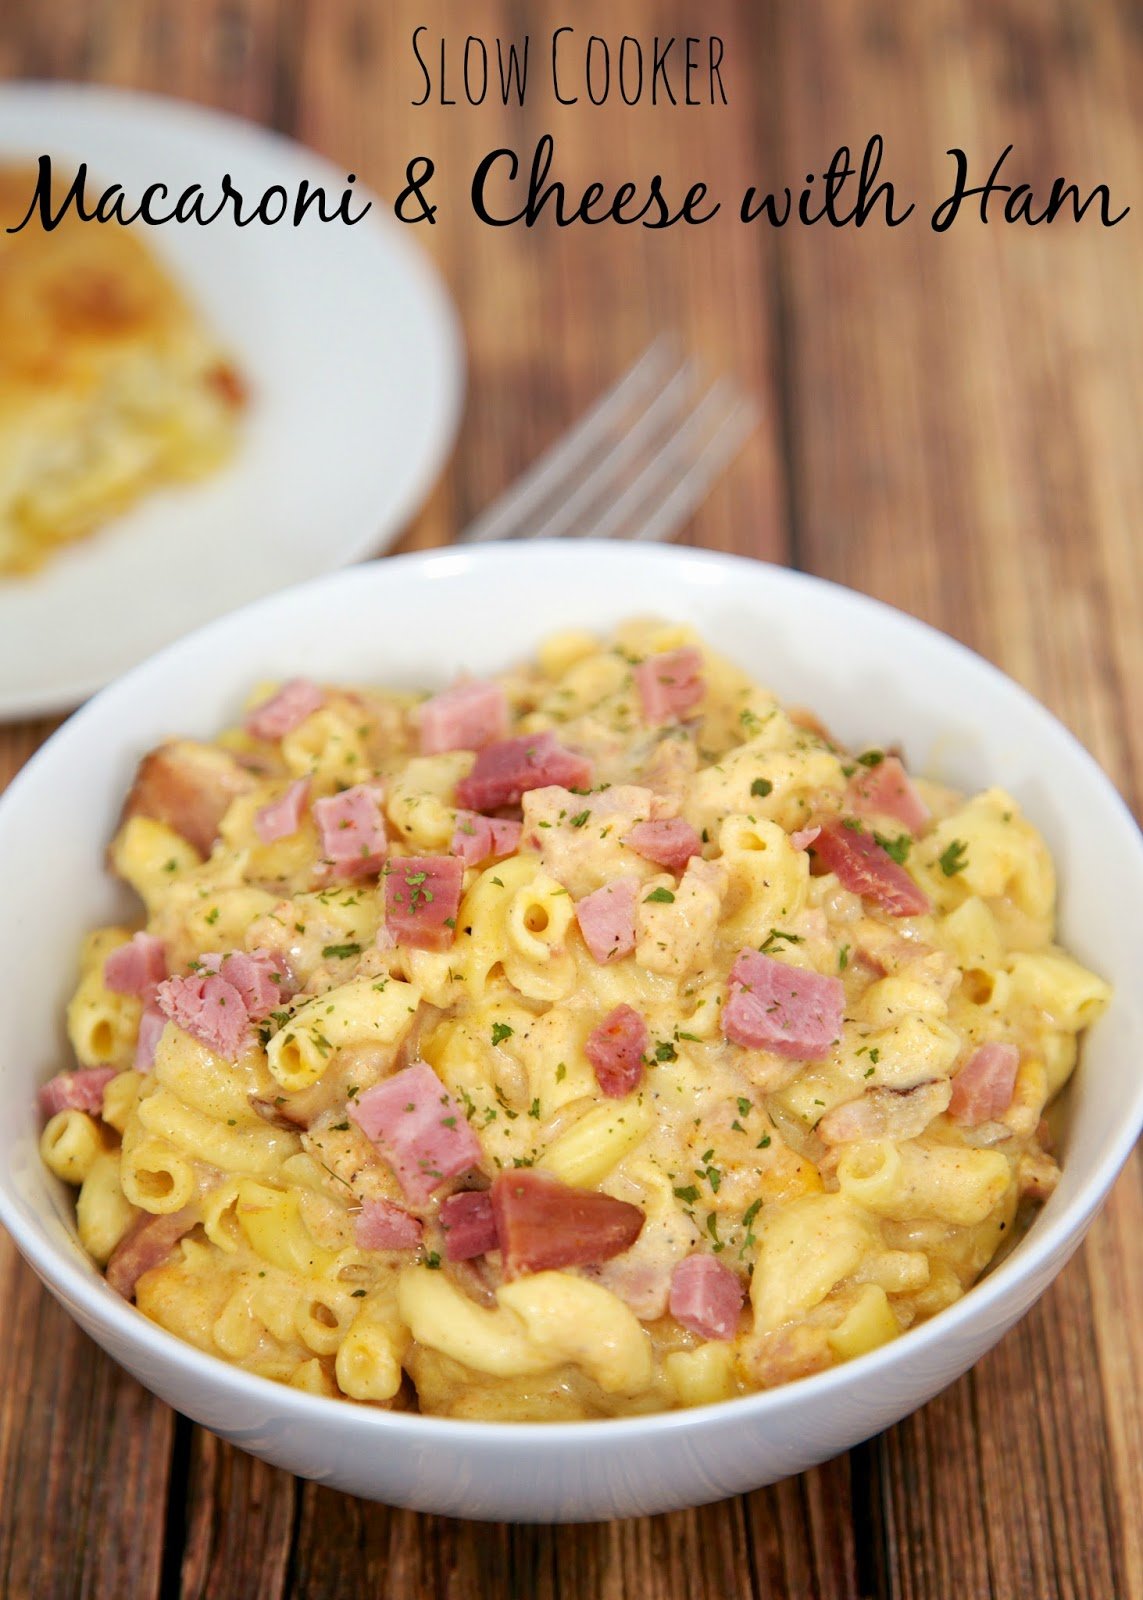 Slow Cooker Macaroni & Cheese with Ham - great flavor and ready in 90 minutes. Can serve without ham as side dish. Macaroni, ham, milk, dijon mustard, onion powder, garlic powder, paprika, salt, pepper and cheddar cheese. Our FAVORITE mac and cheese recipe!!